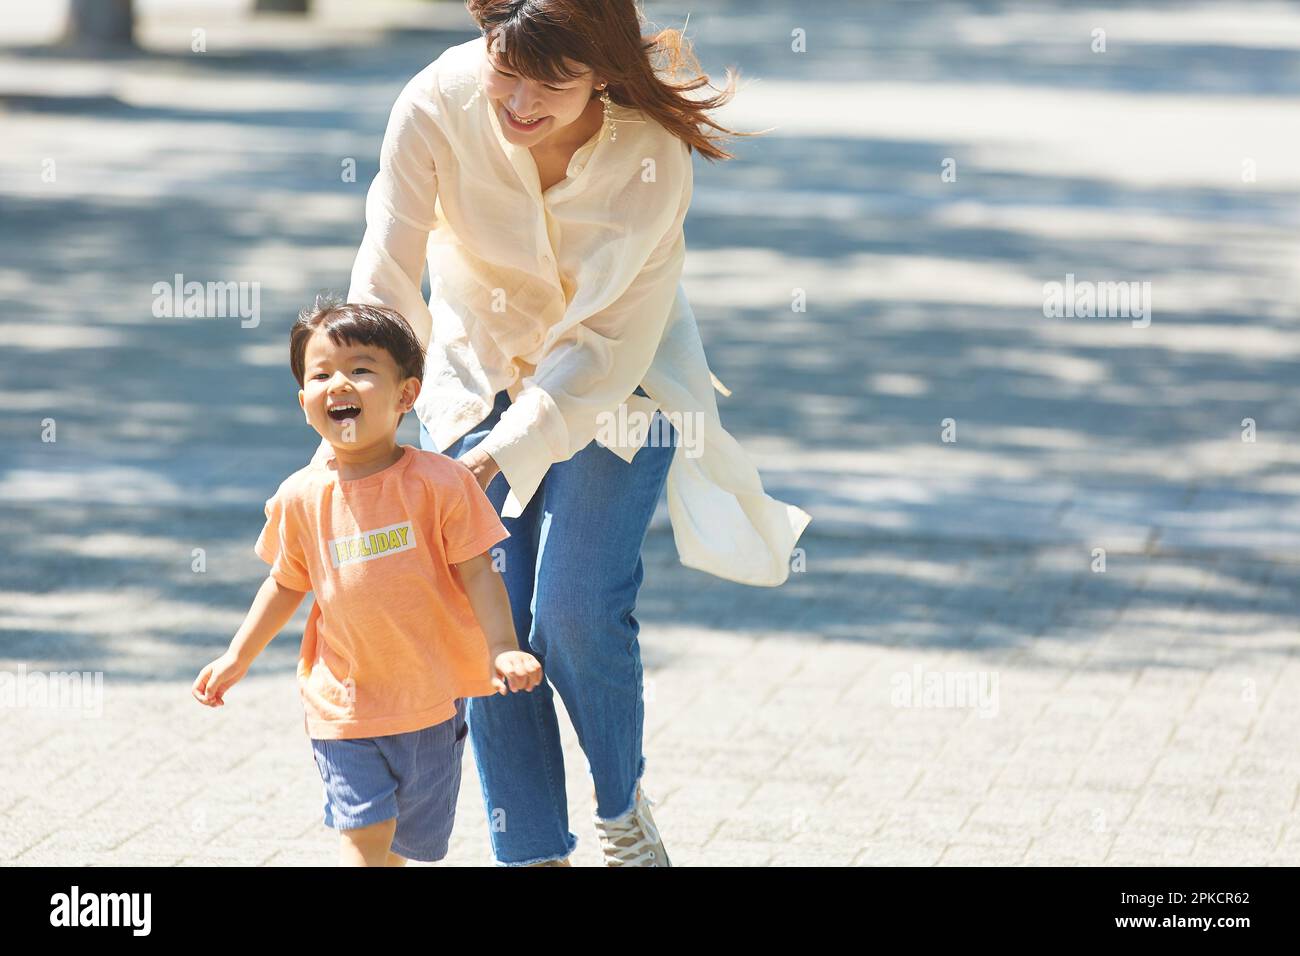 Mother chasing after her smiling son Stock Photo